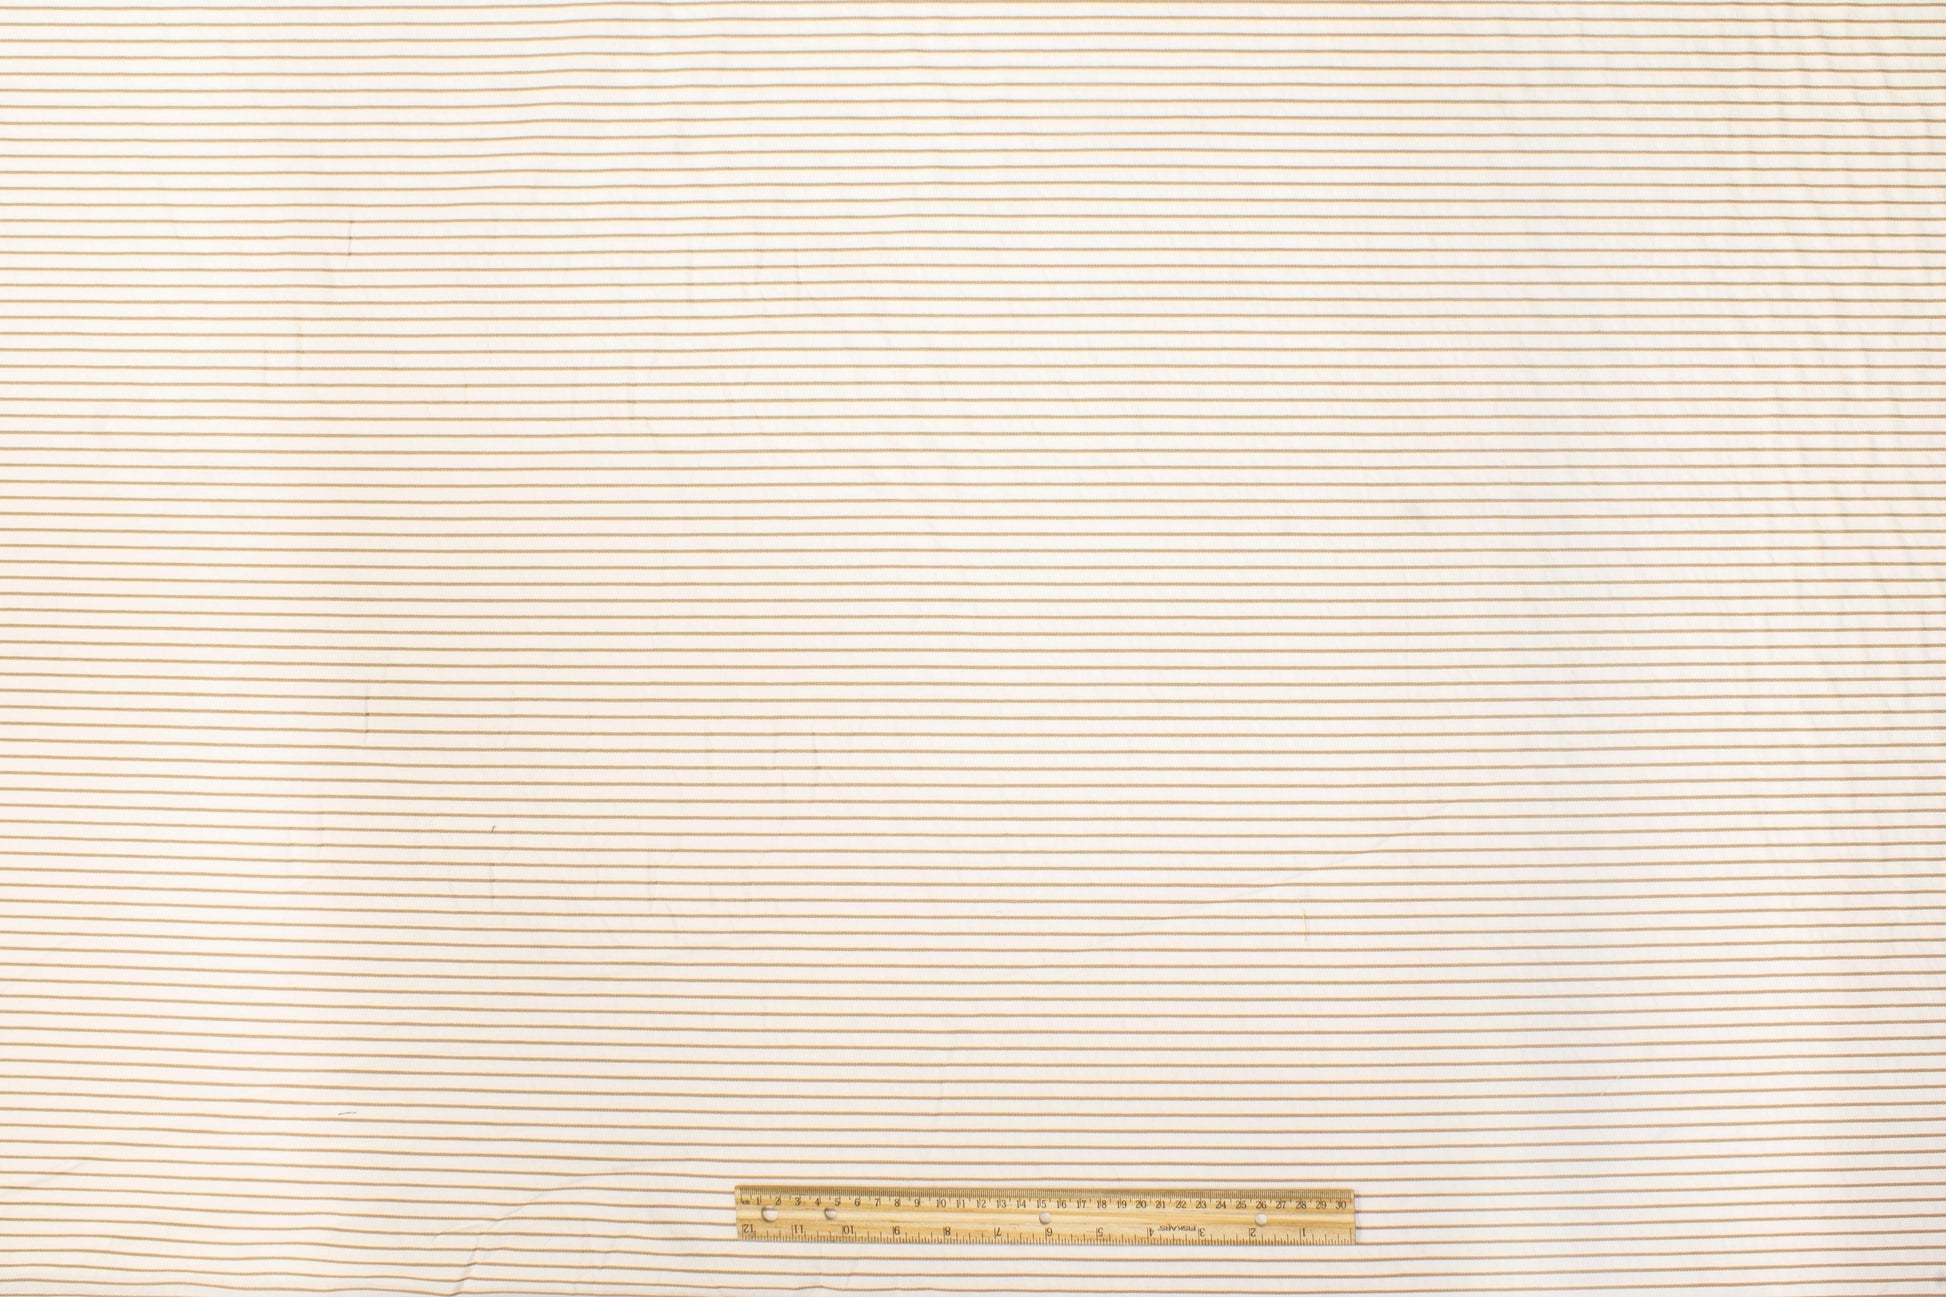 Textured Striped Cotton Twill - Brown and Off White - Prime Fabrics